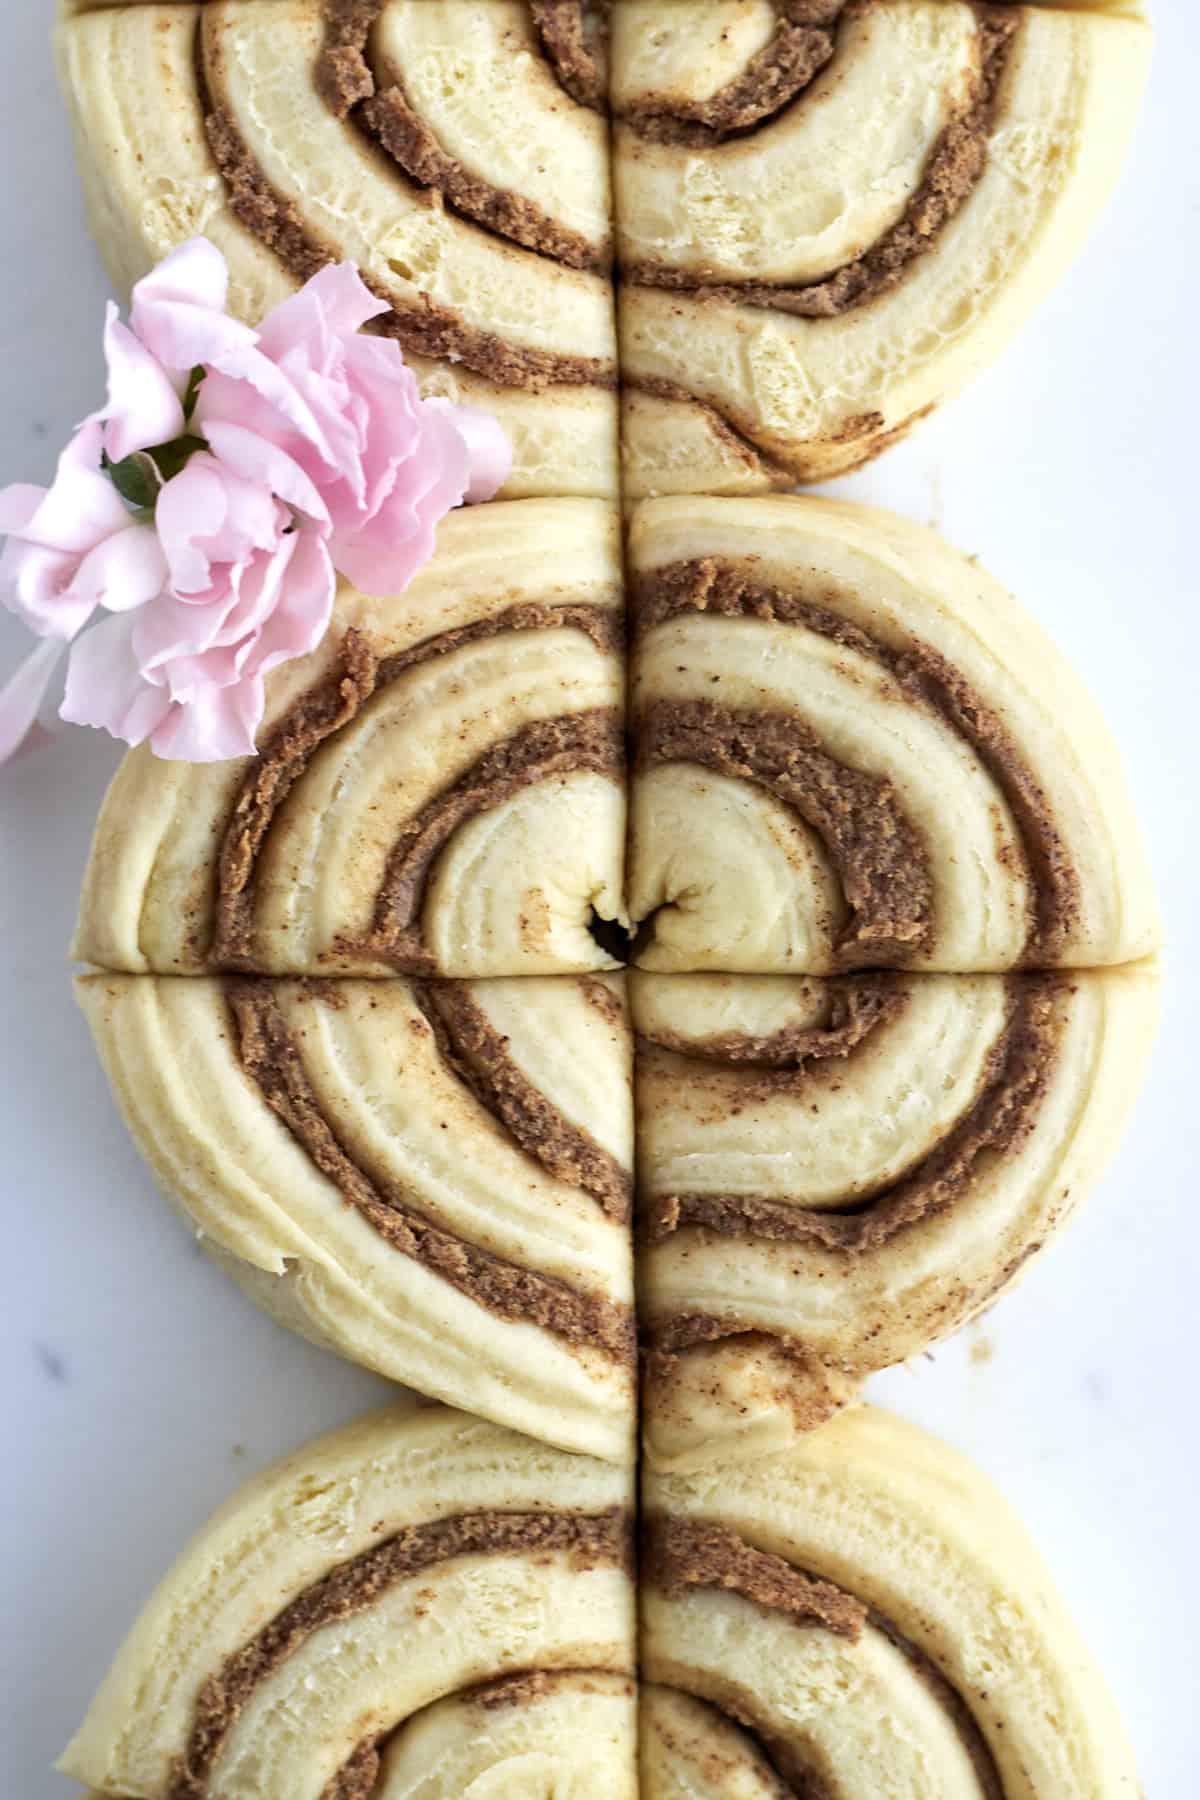 three unbaked cinnamon rolls that have been sliced into quarters.